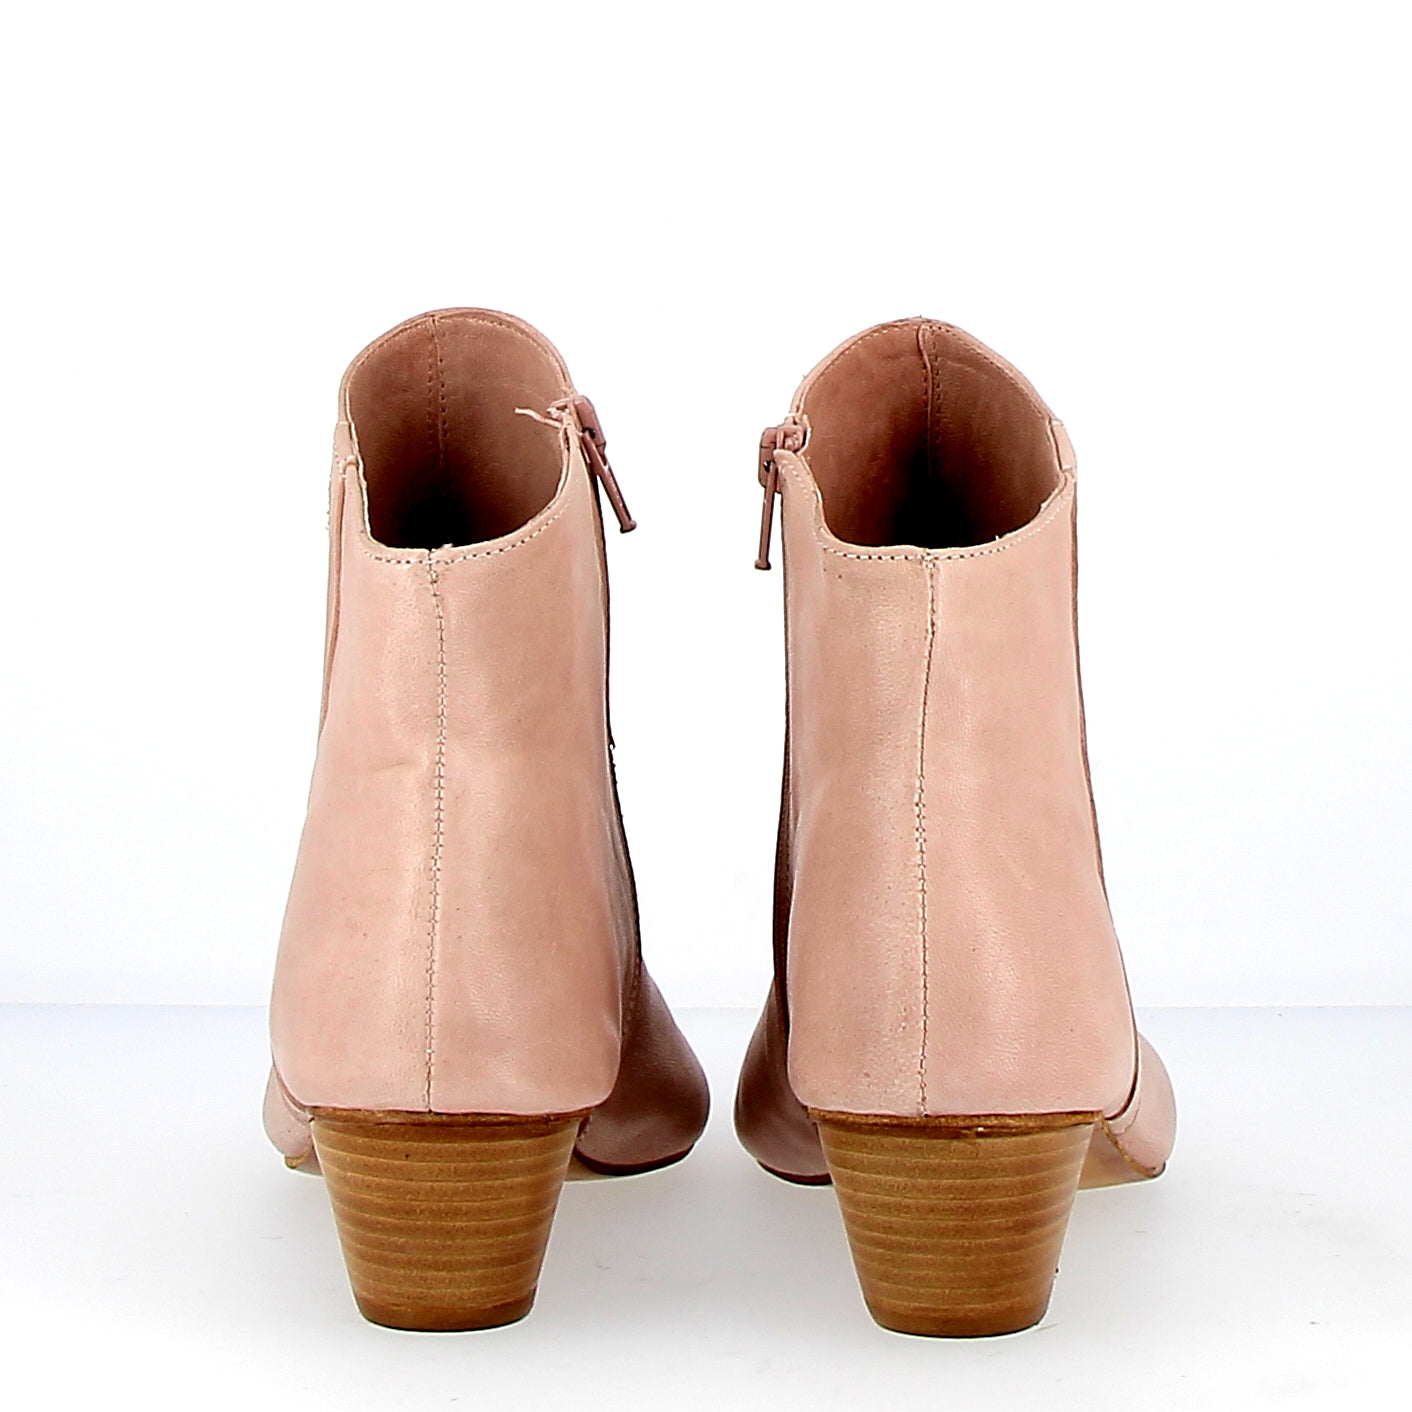 Peony zipped ankle boot